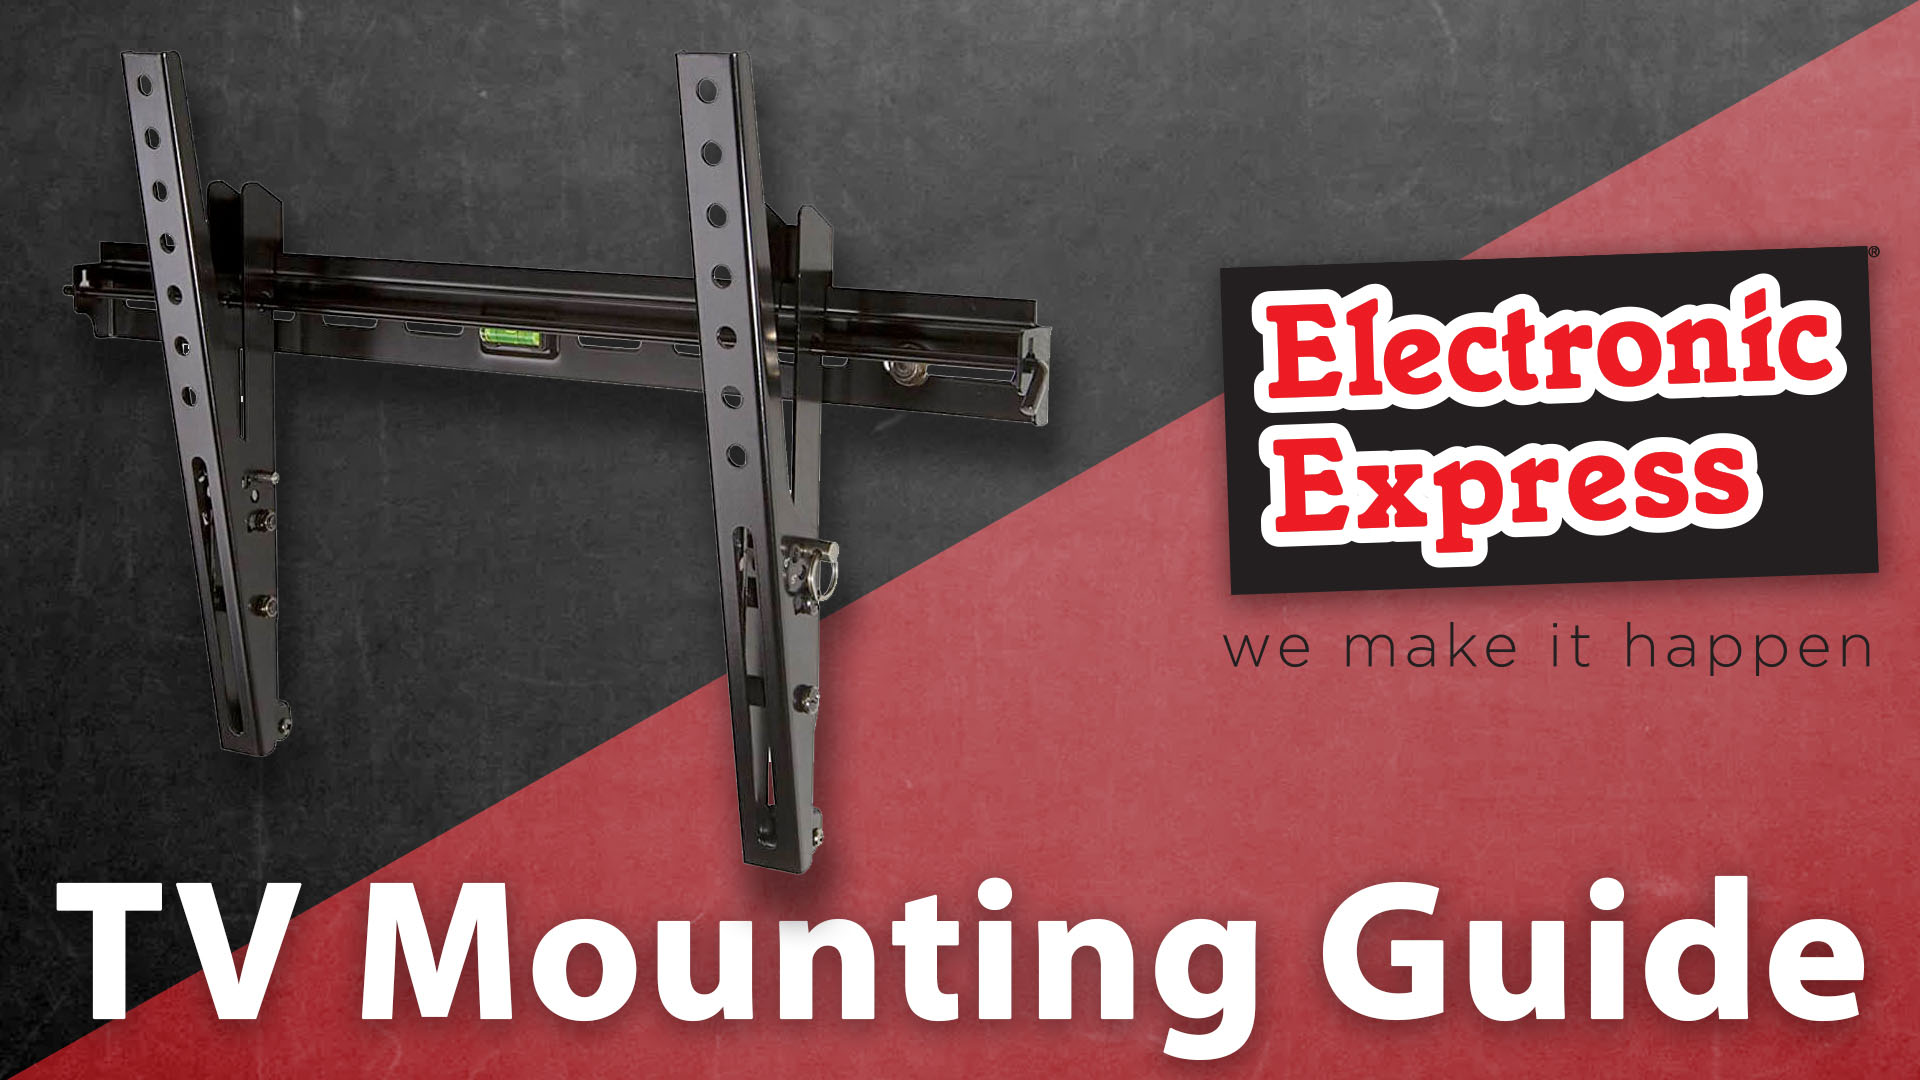 TV Mounting Guide Header